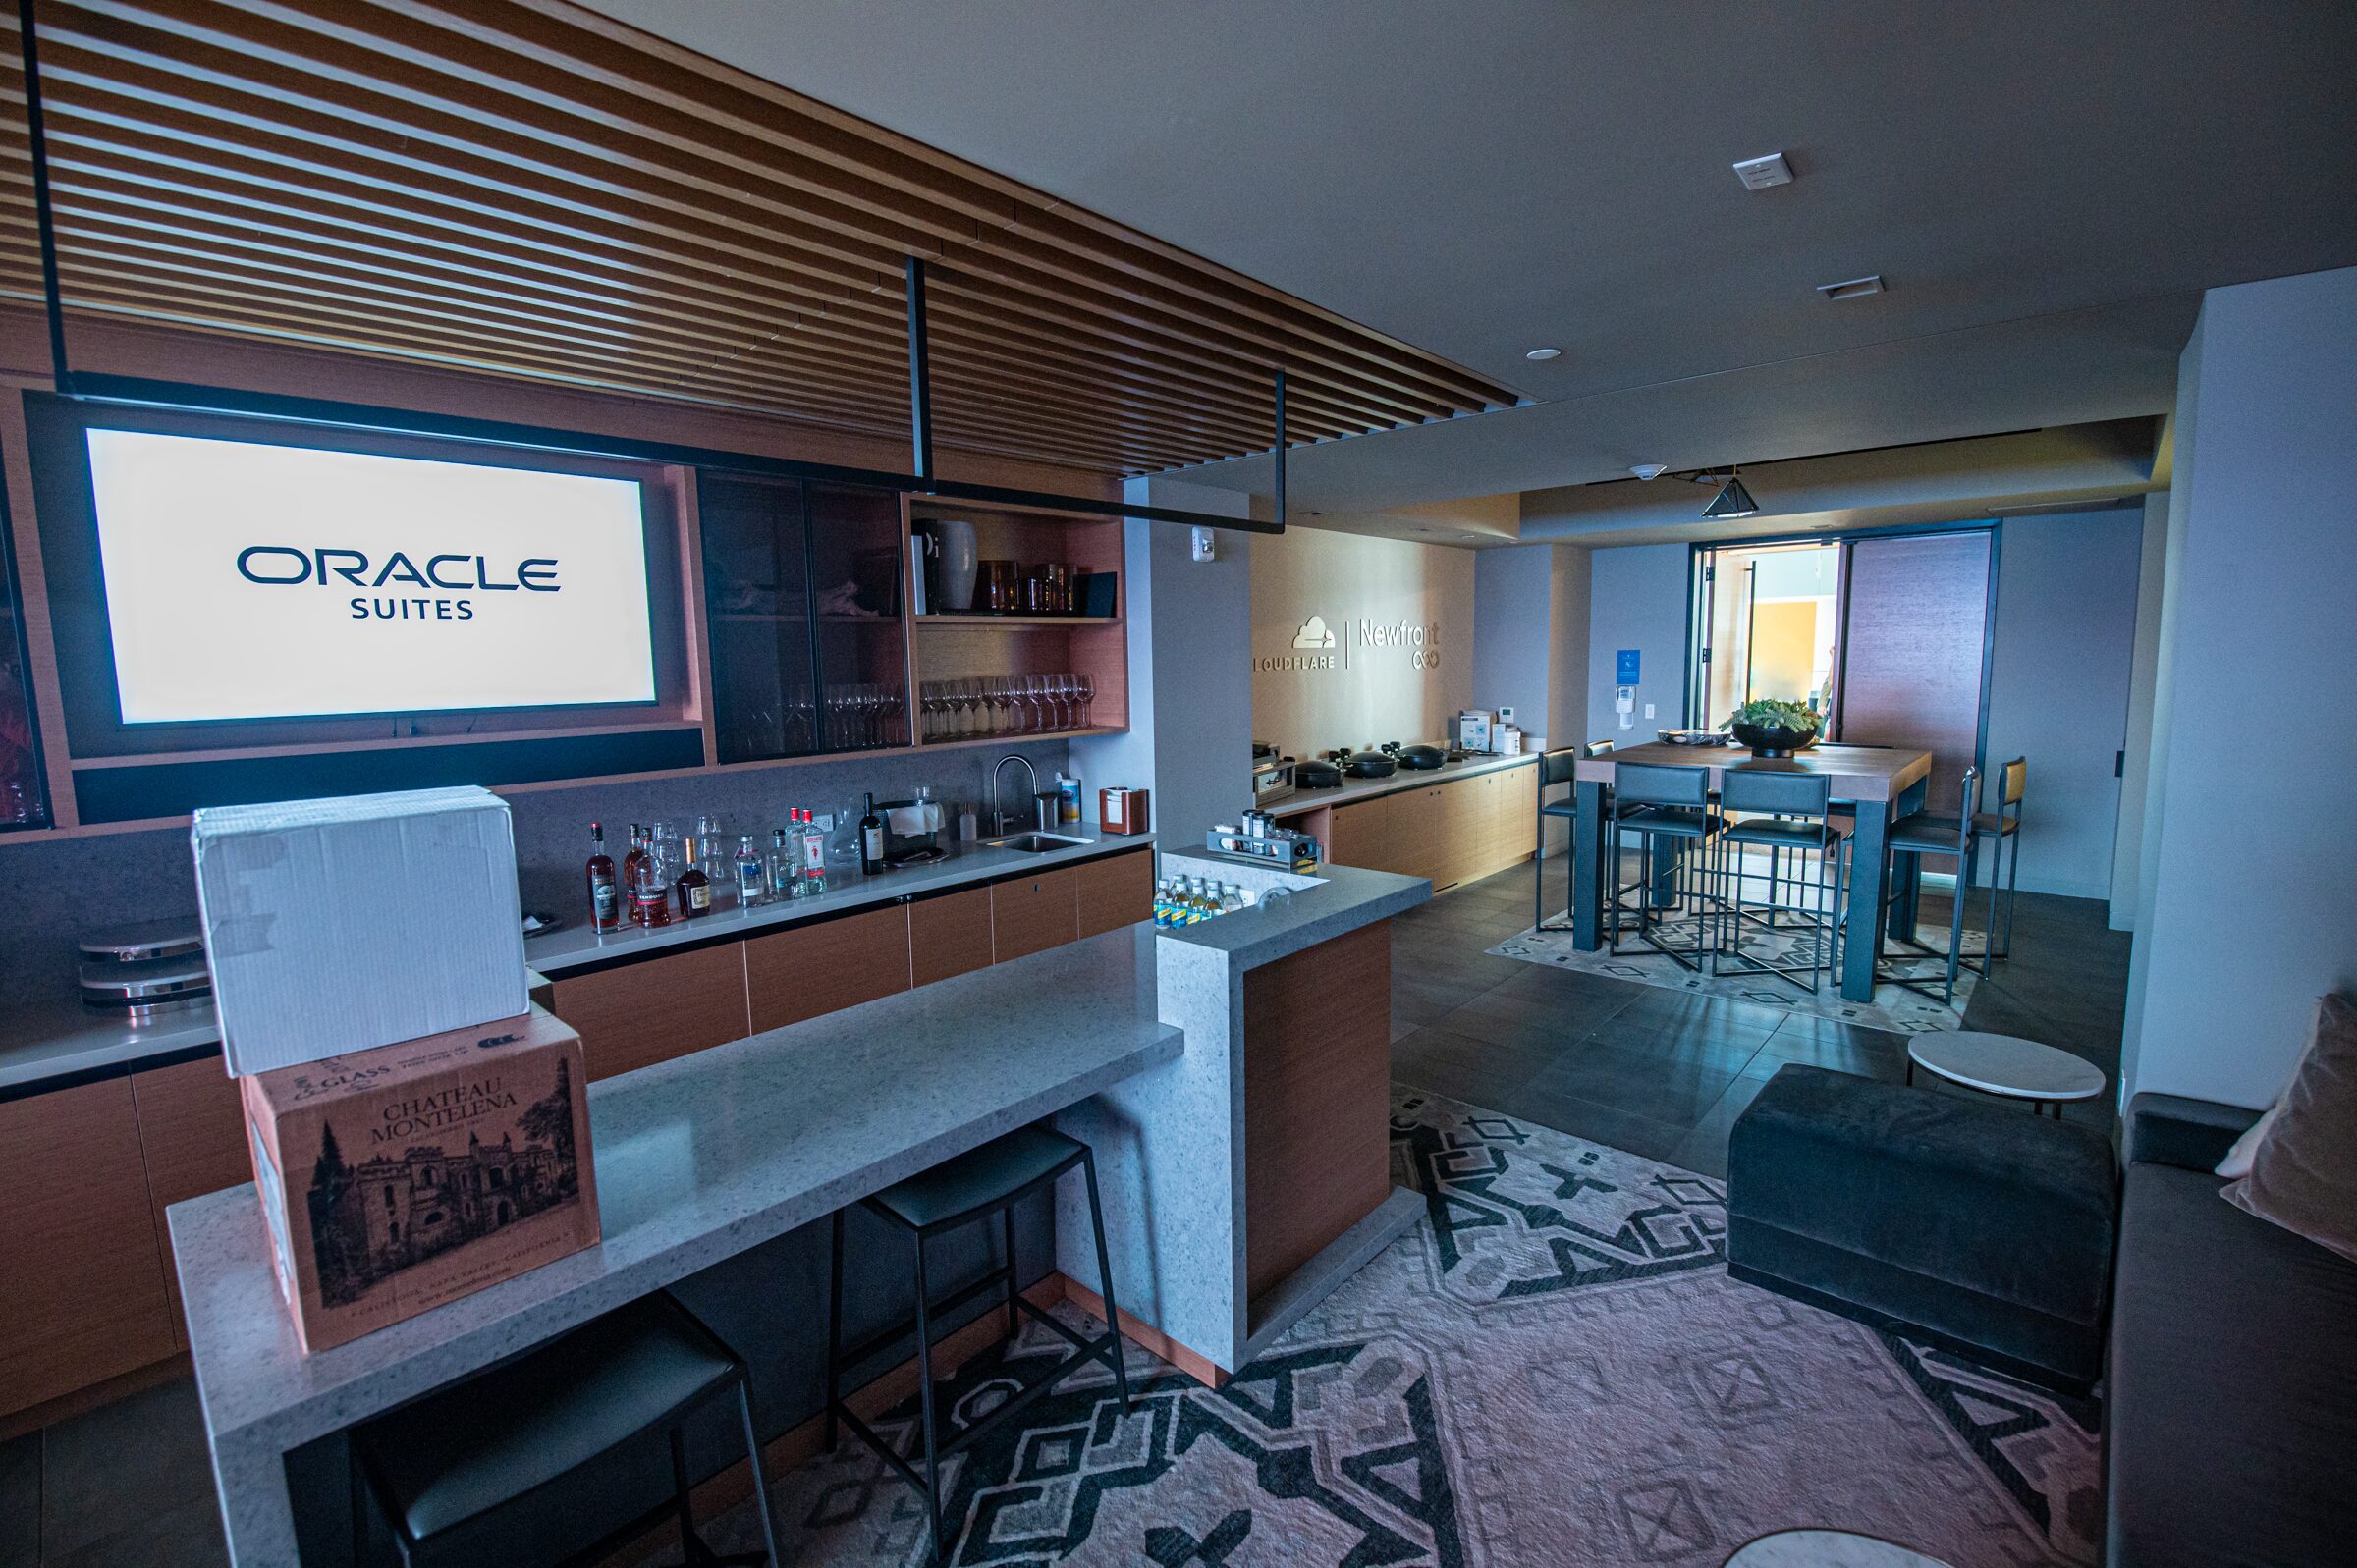 One of the private suites at the Chase Center